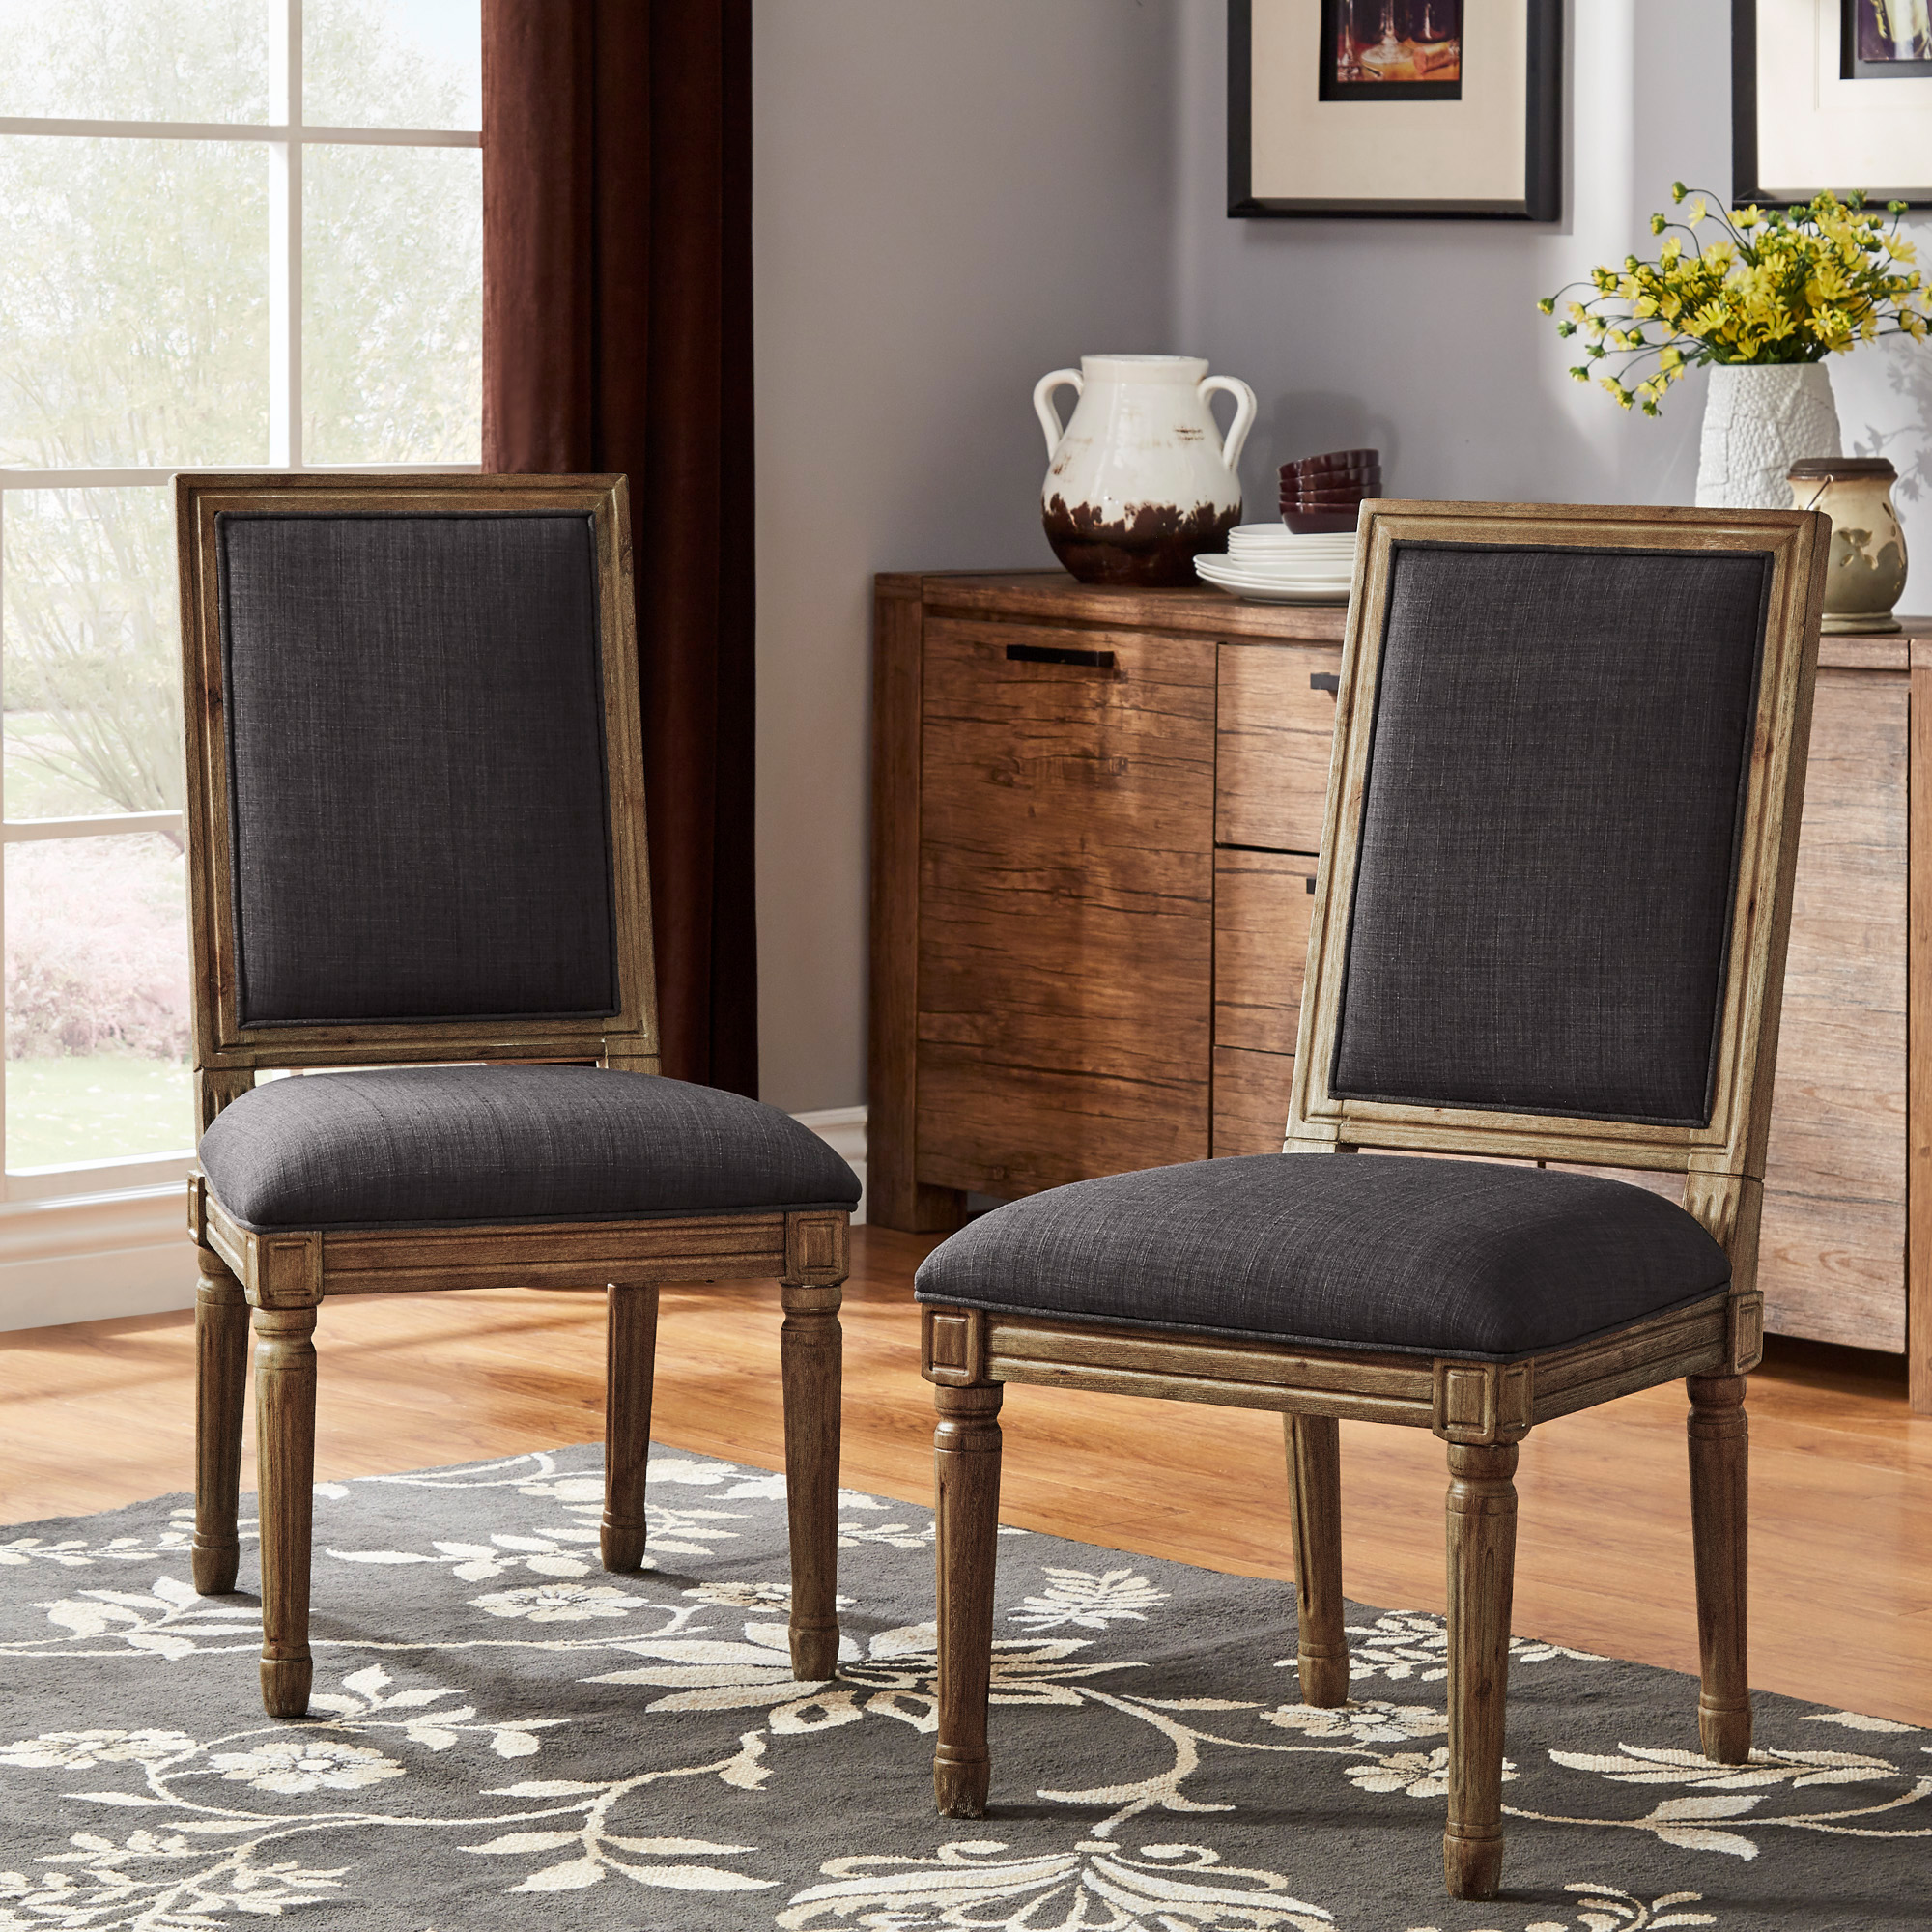 Rectangular Linen and Wood Dining Chairs (Set of 2)